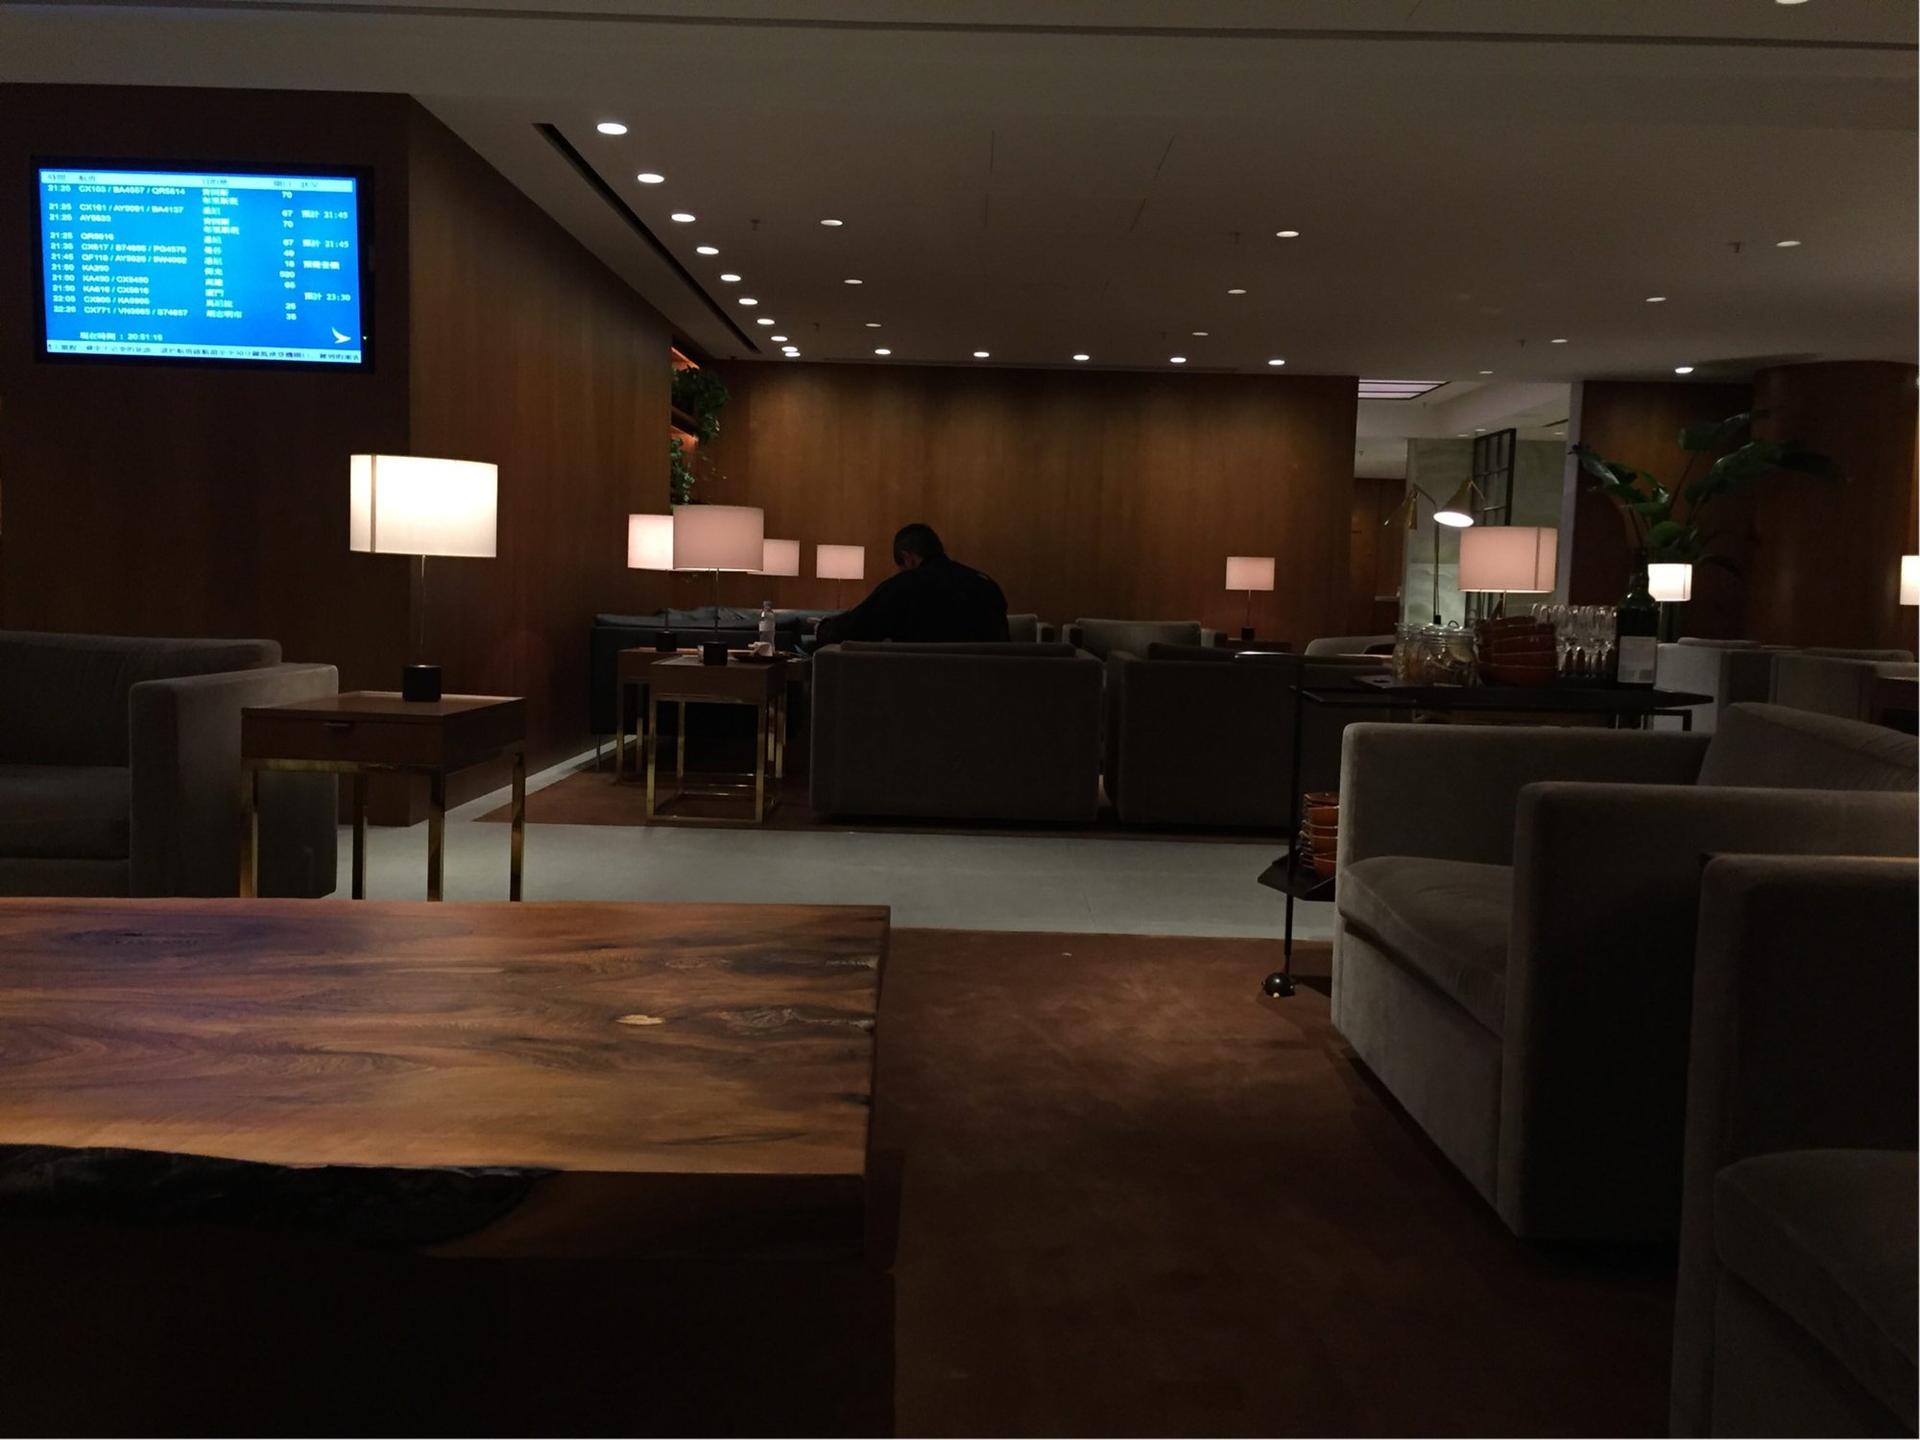 Cathay Pacific The Pier First Class Lounge image 24 of 100